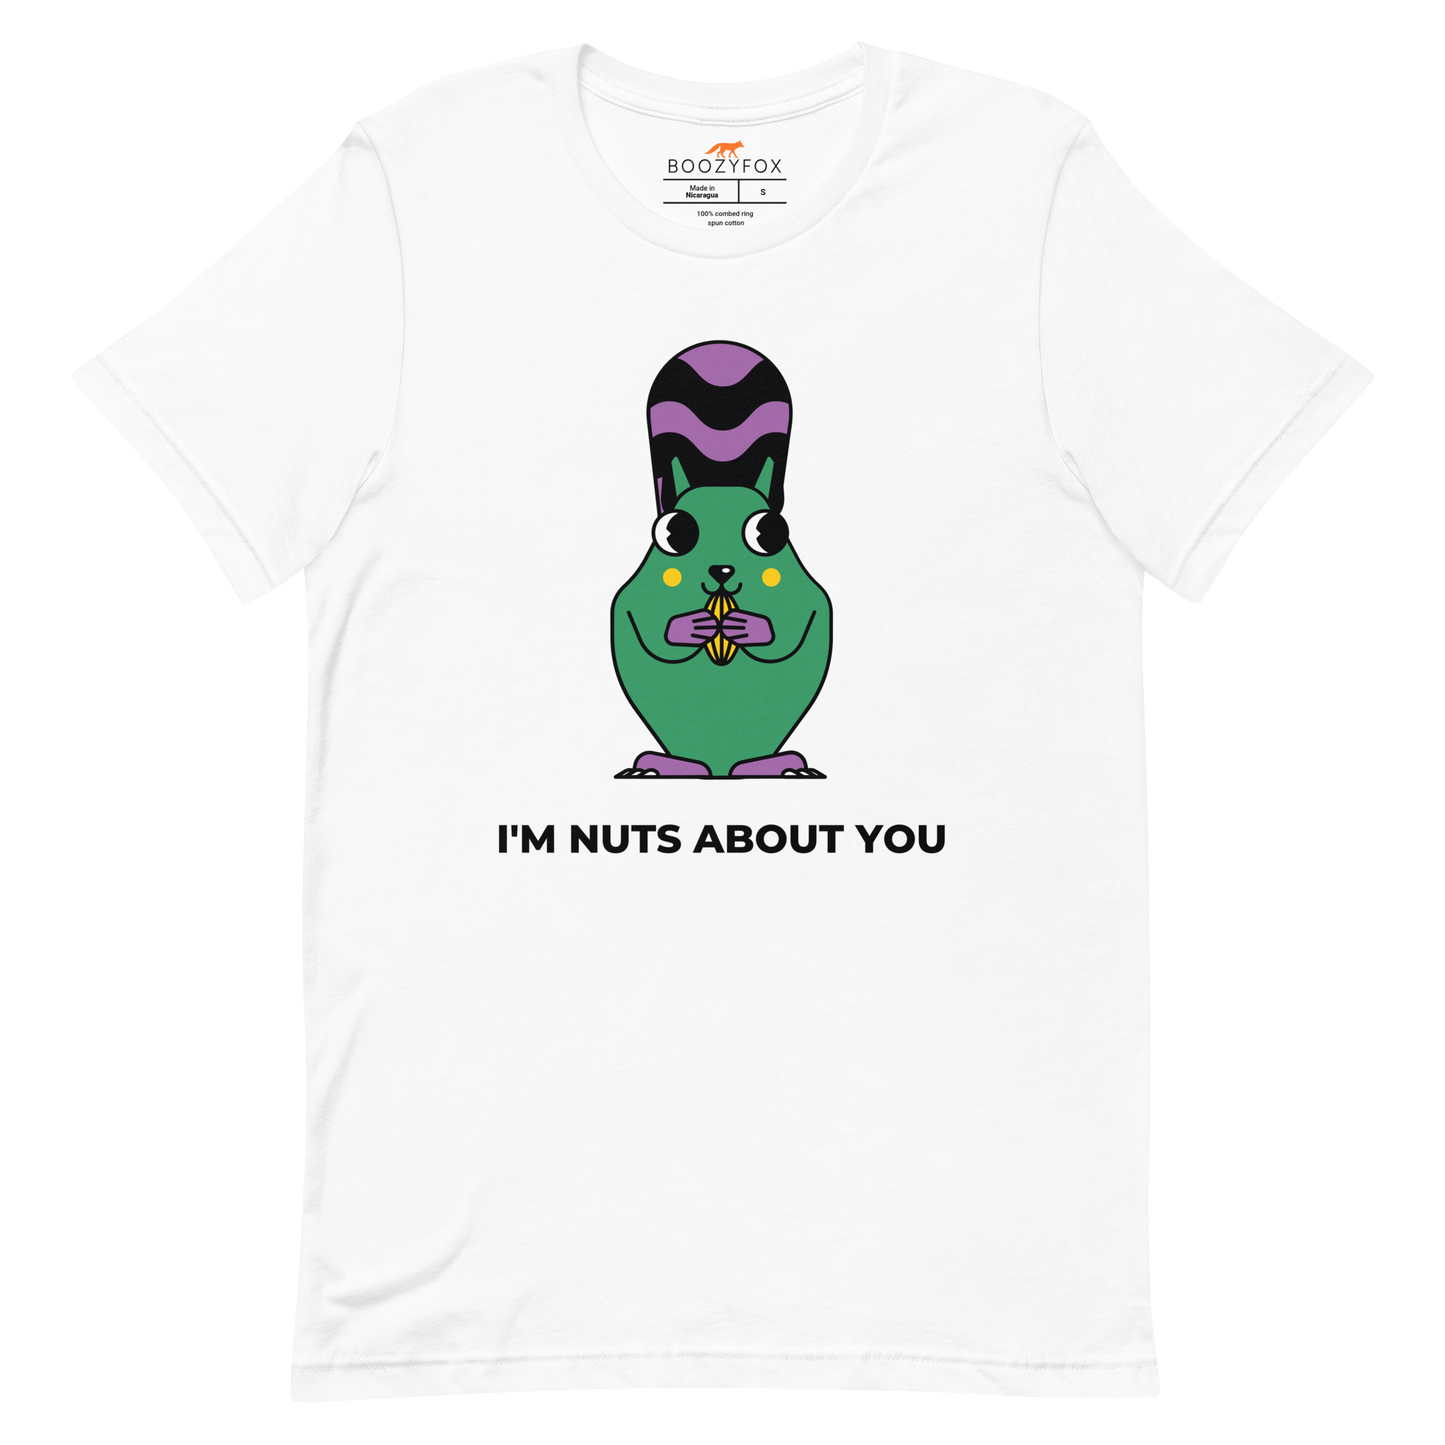 White Premium Squirrel T-Shirt featuring an I'm Nuts About You graphic on the chest - Funny Graphic Squirrel Tees - Boozy Fox